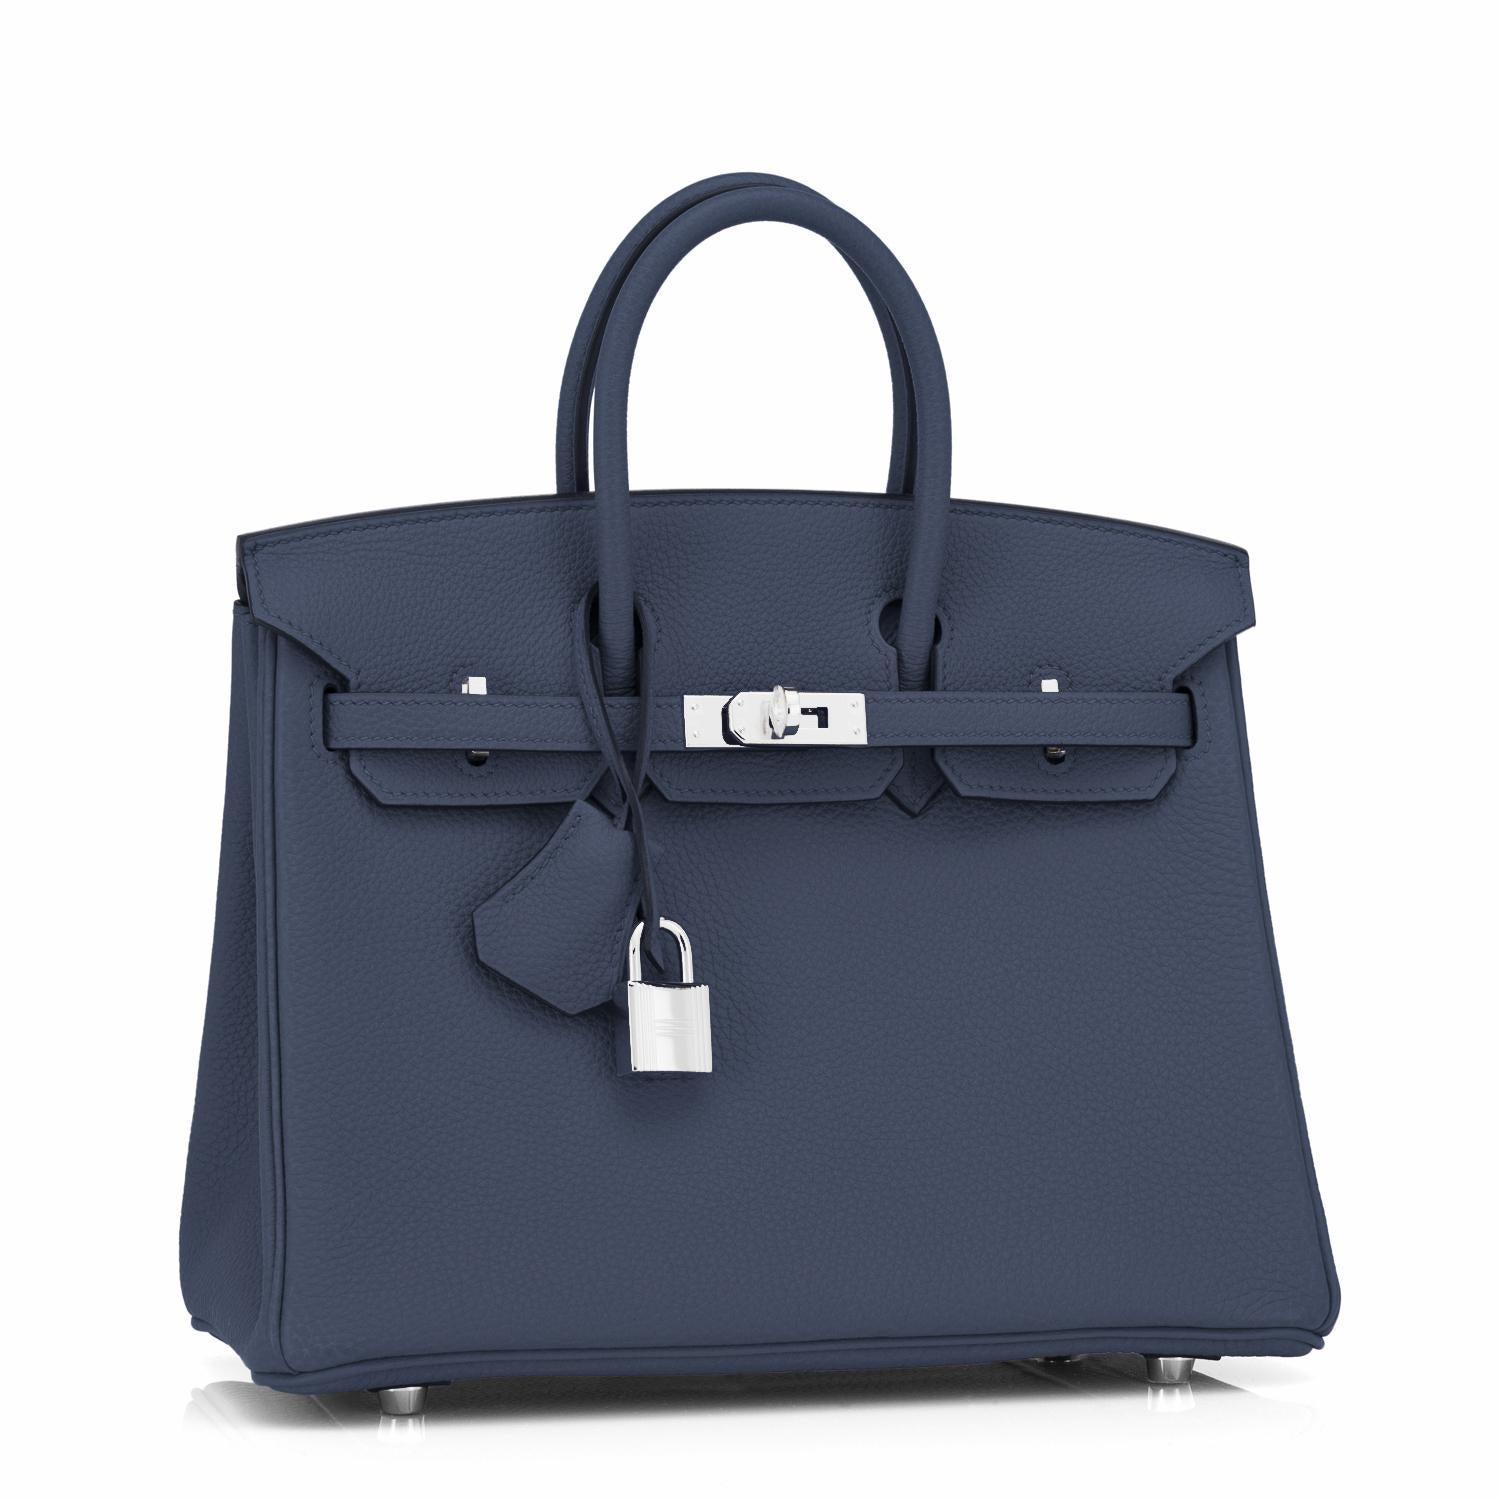 Hermes Birkin 25cm Blue Nuit Navy Bag Z Stamp, 2021
Just purchased from Hermes store! Bag bears new interior 2021 Z Stamp.
Brand New in Box. Store fresh. Pristine Condition (with plastic on hardware)
Perfect gift!  Comes with keys, lock, clochette,